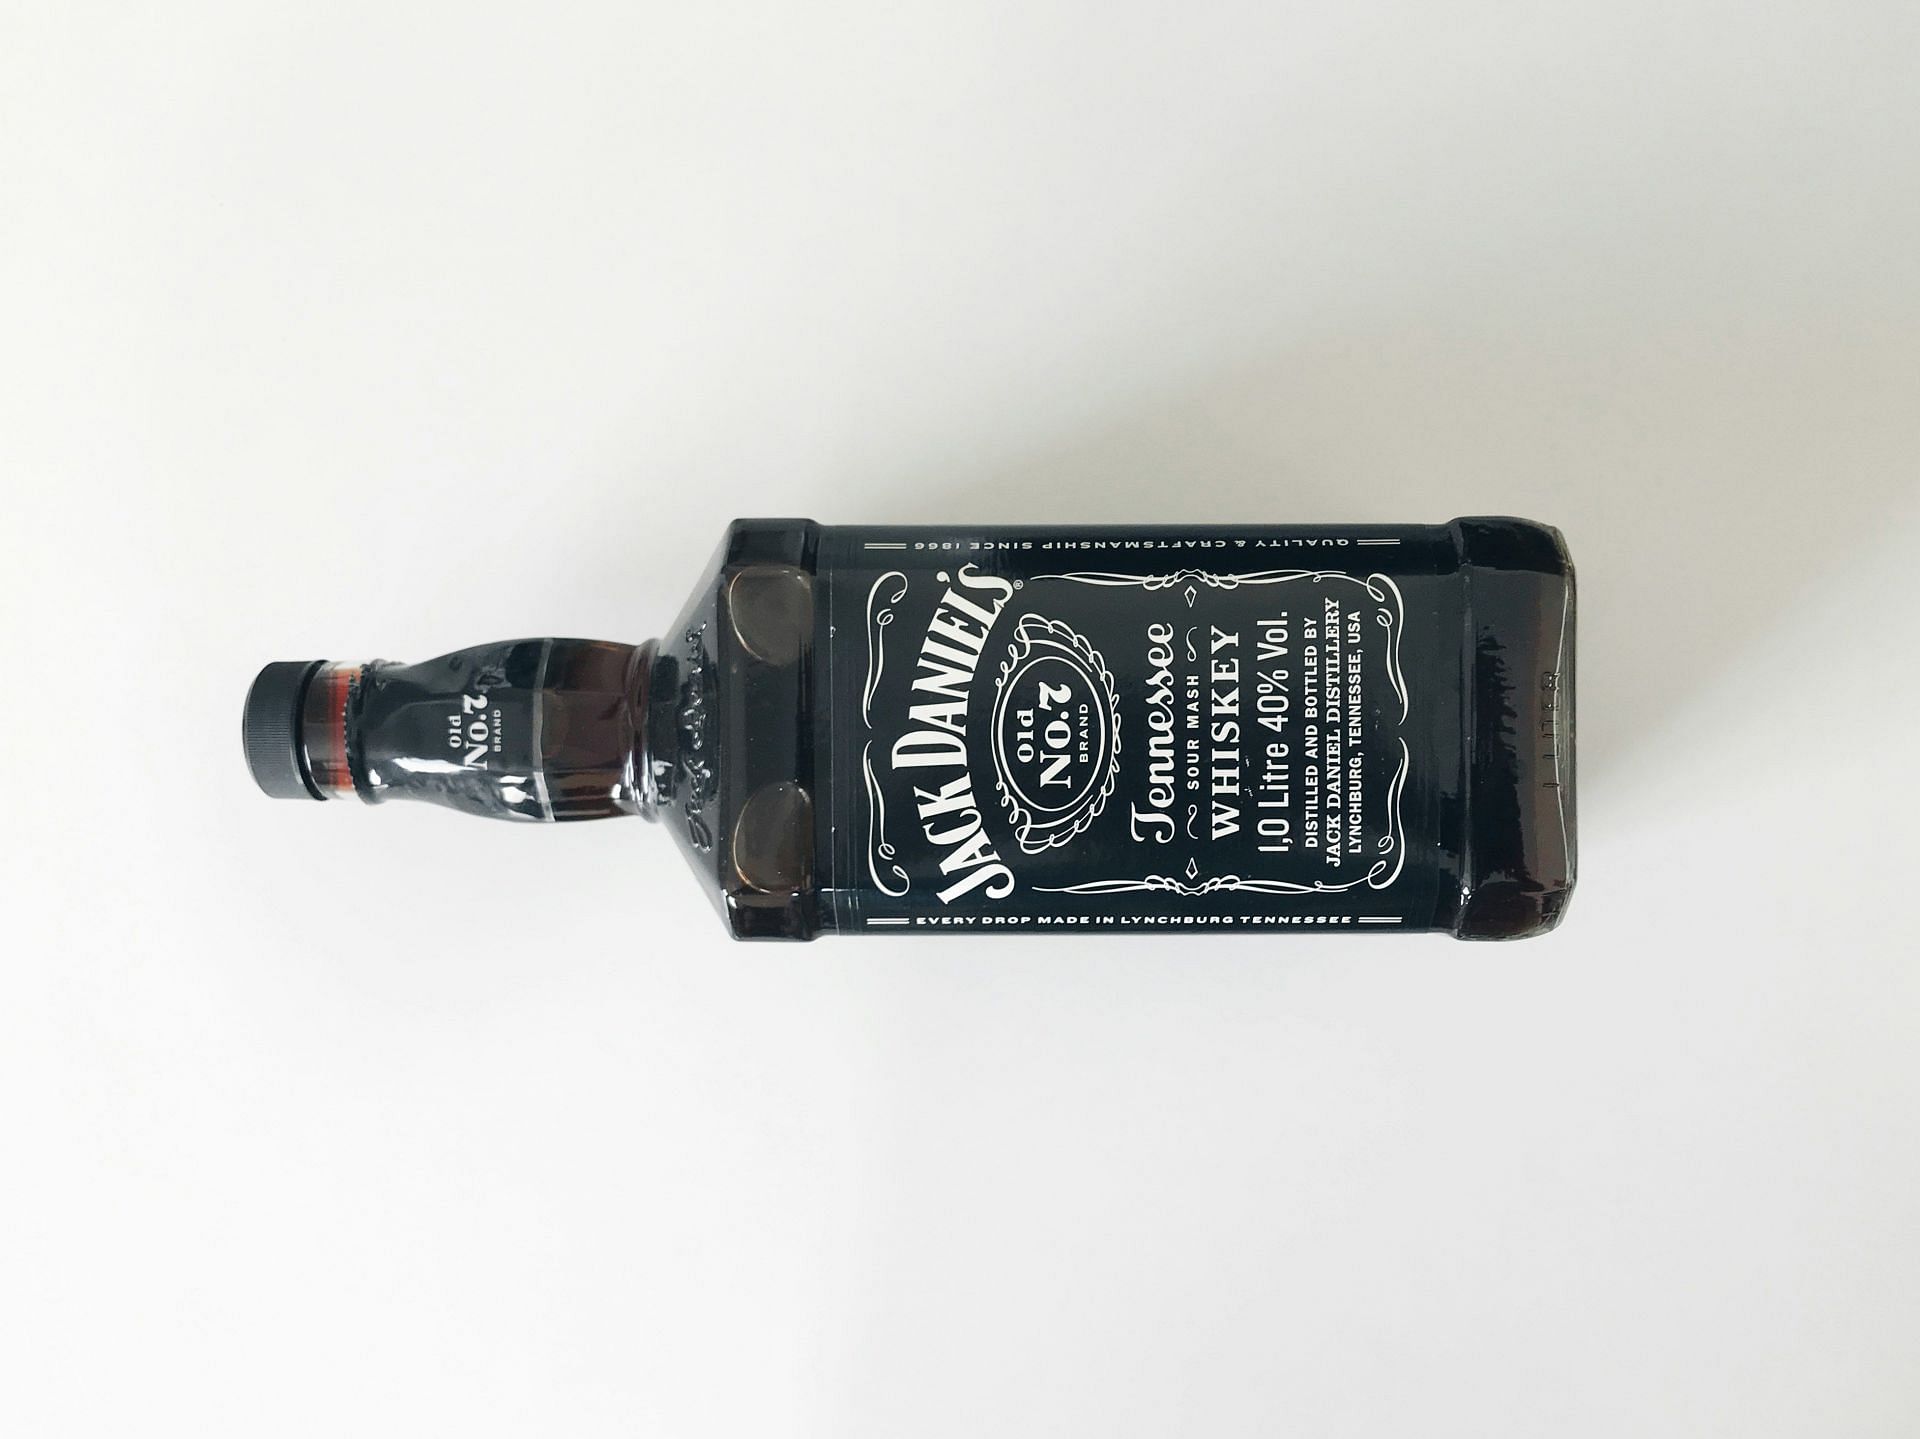 How to lower ALT: Say no to liquor (Image by Milad Fakurian/Unsplash)